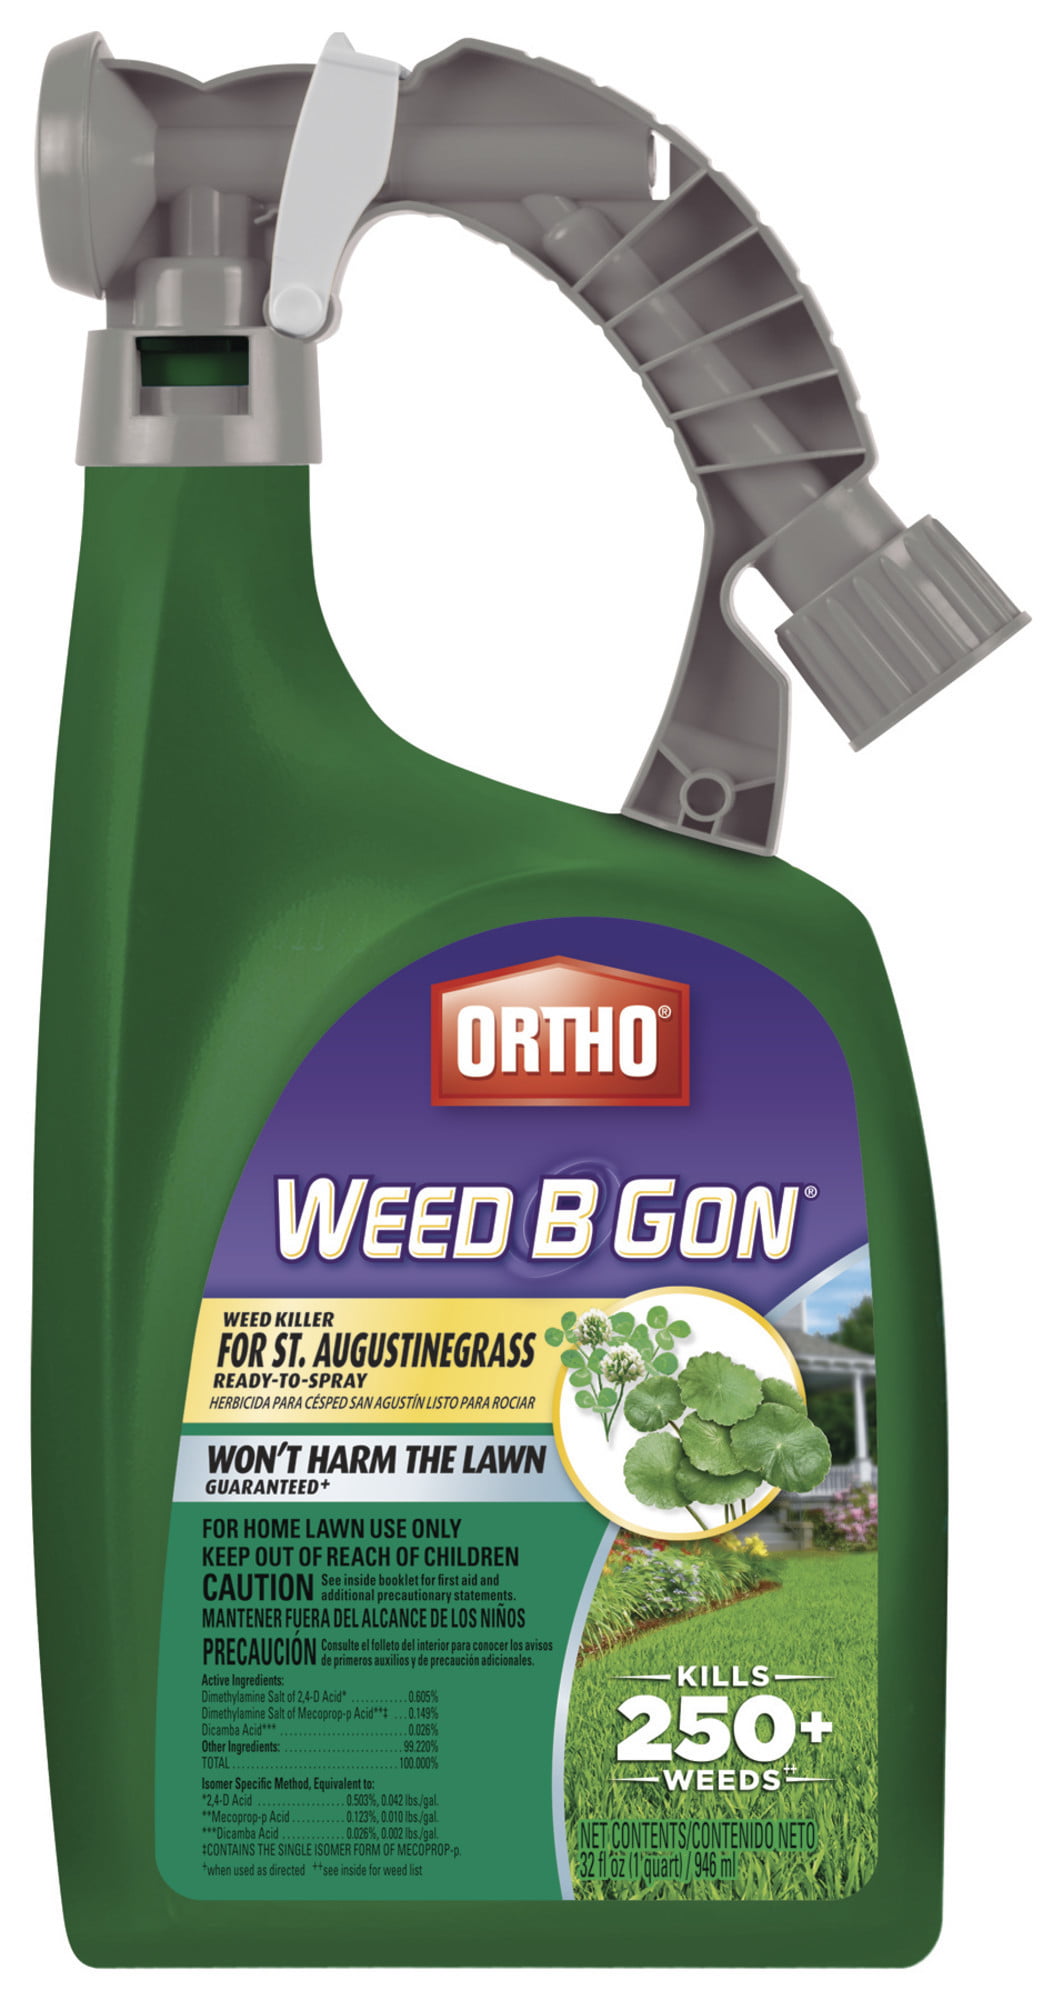 Ortho Weed Killer Review - www.inf-inet.com